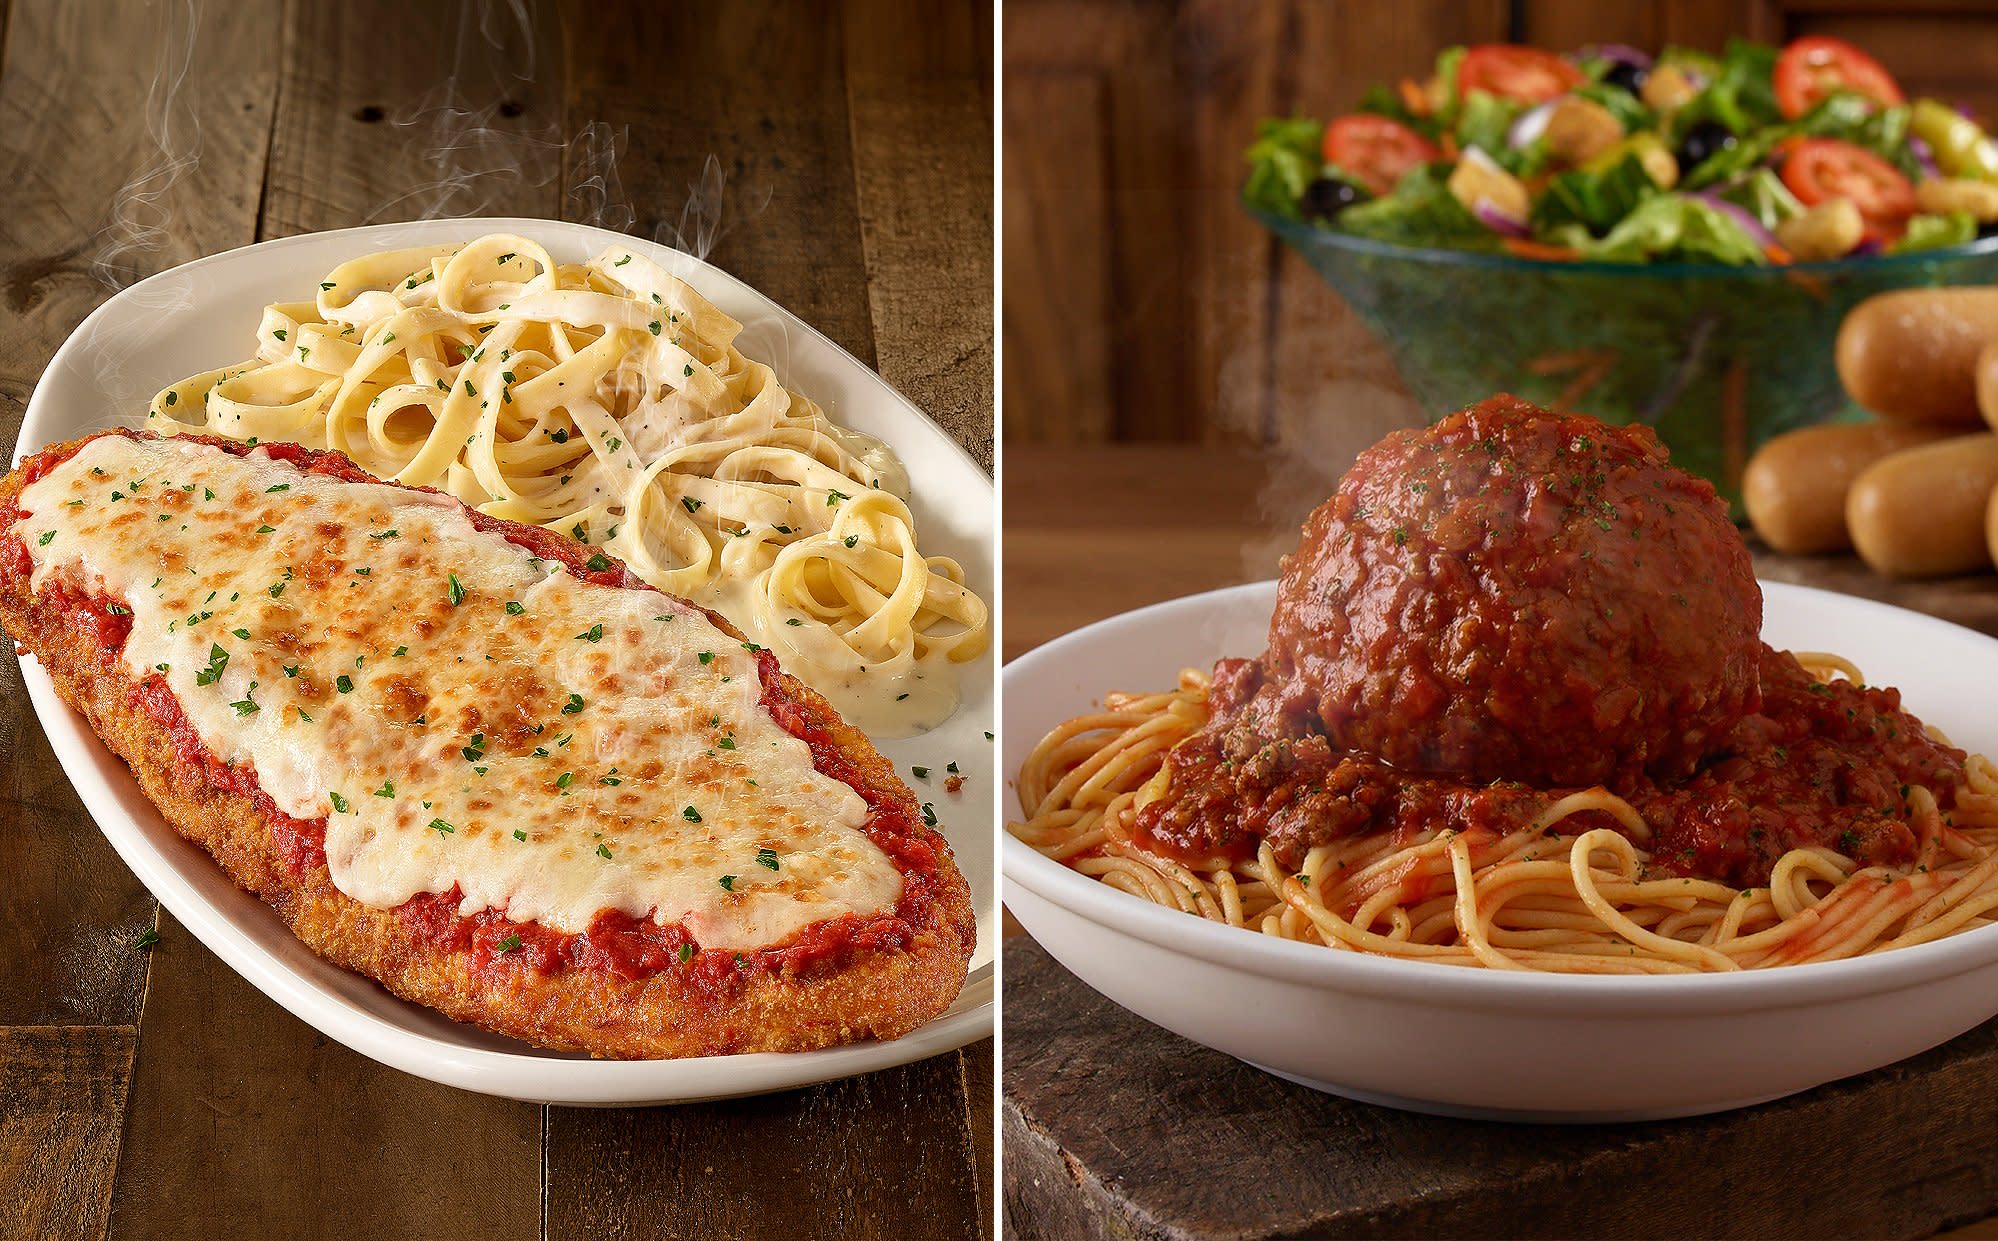 olive-garden-adds-new-giant-classics-to-the-menu-including-an-11-inch